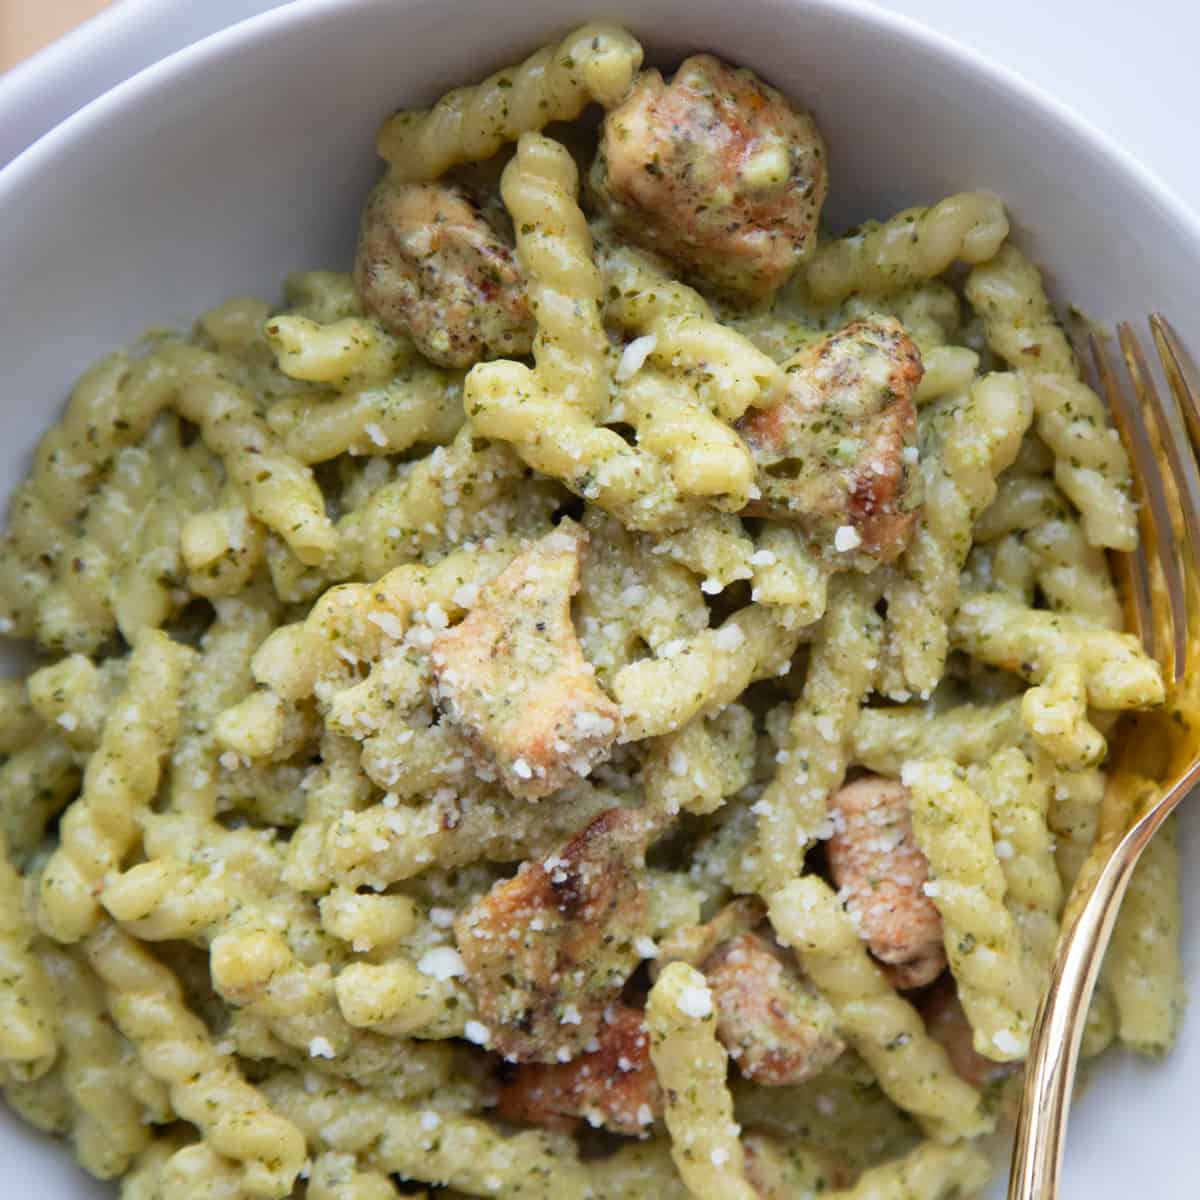 Creamy pesto pasta with chicken in a bowl with a fork on the side. The pasta is light green in color and topped with parmesan cheese.